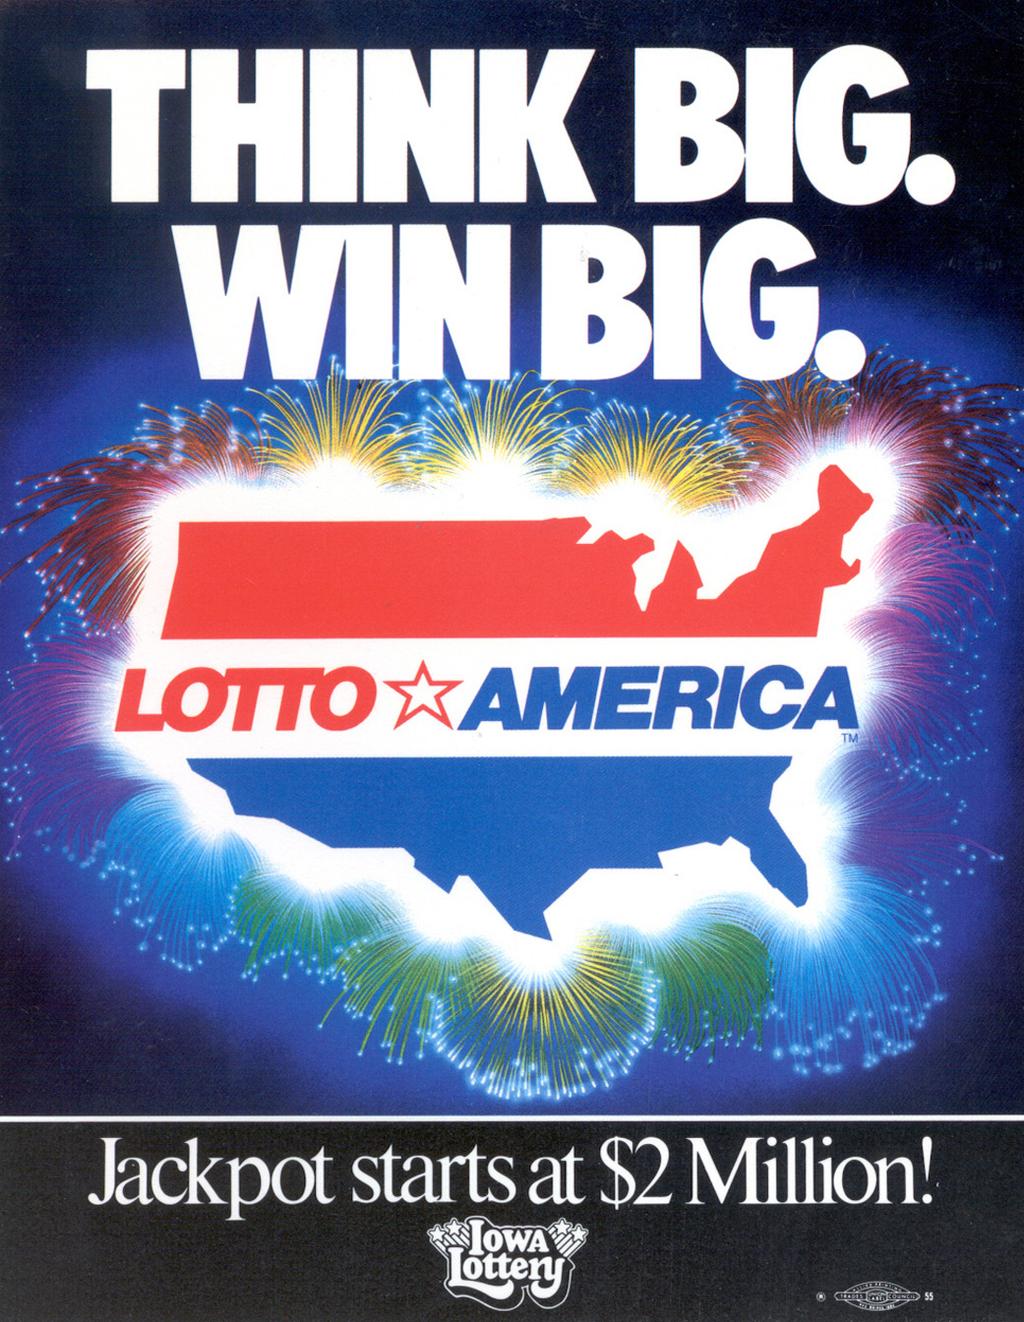 Sept. 30, 1987 - The Iowa LOTTO game changes to two drawings per week. Oct. 12, 1987 - The Iowa Lottery becomes the first in the nation to begin selling pull-tab tickets.